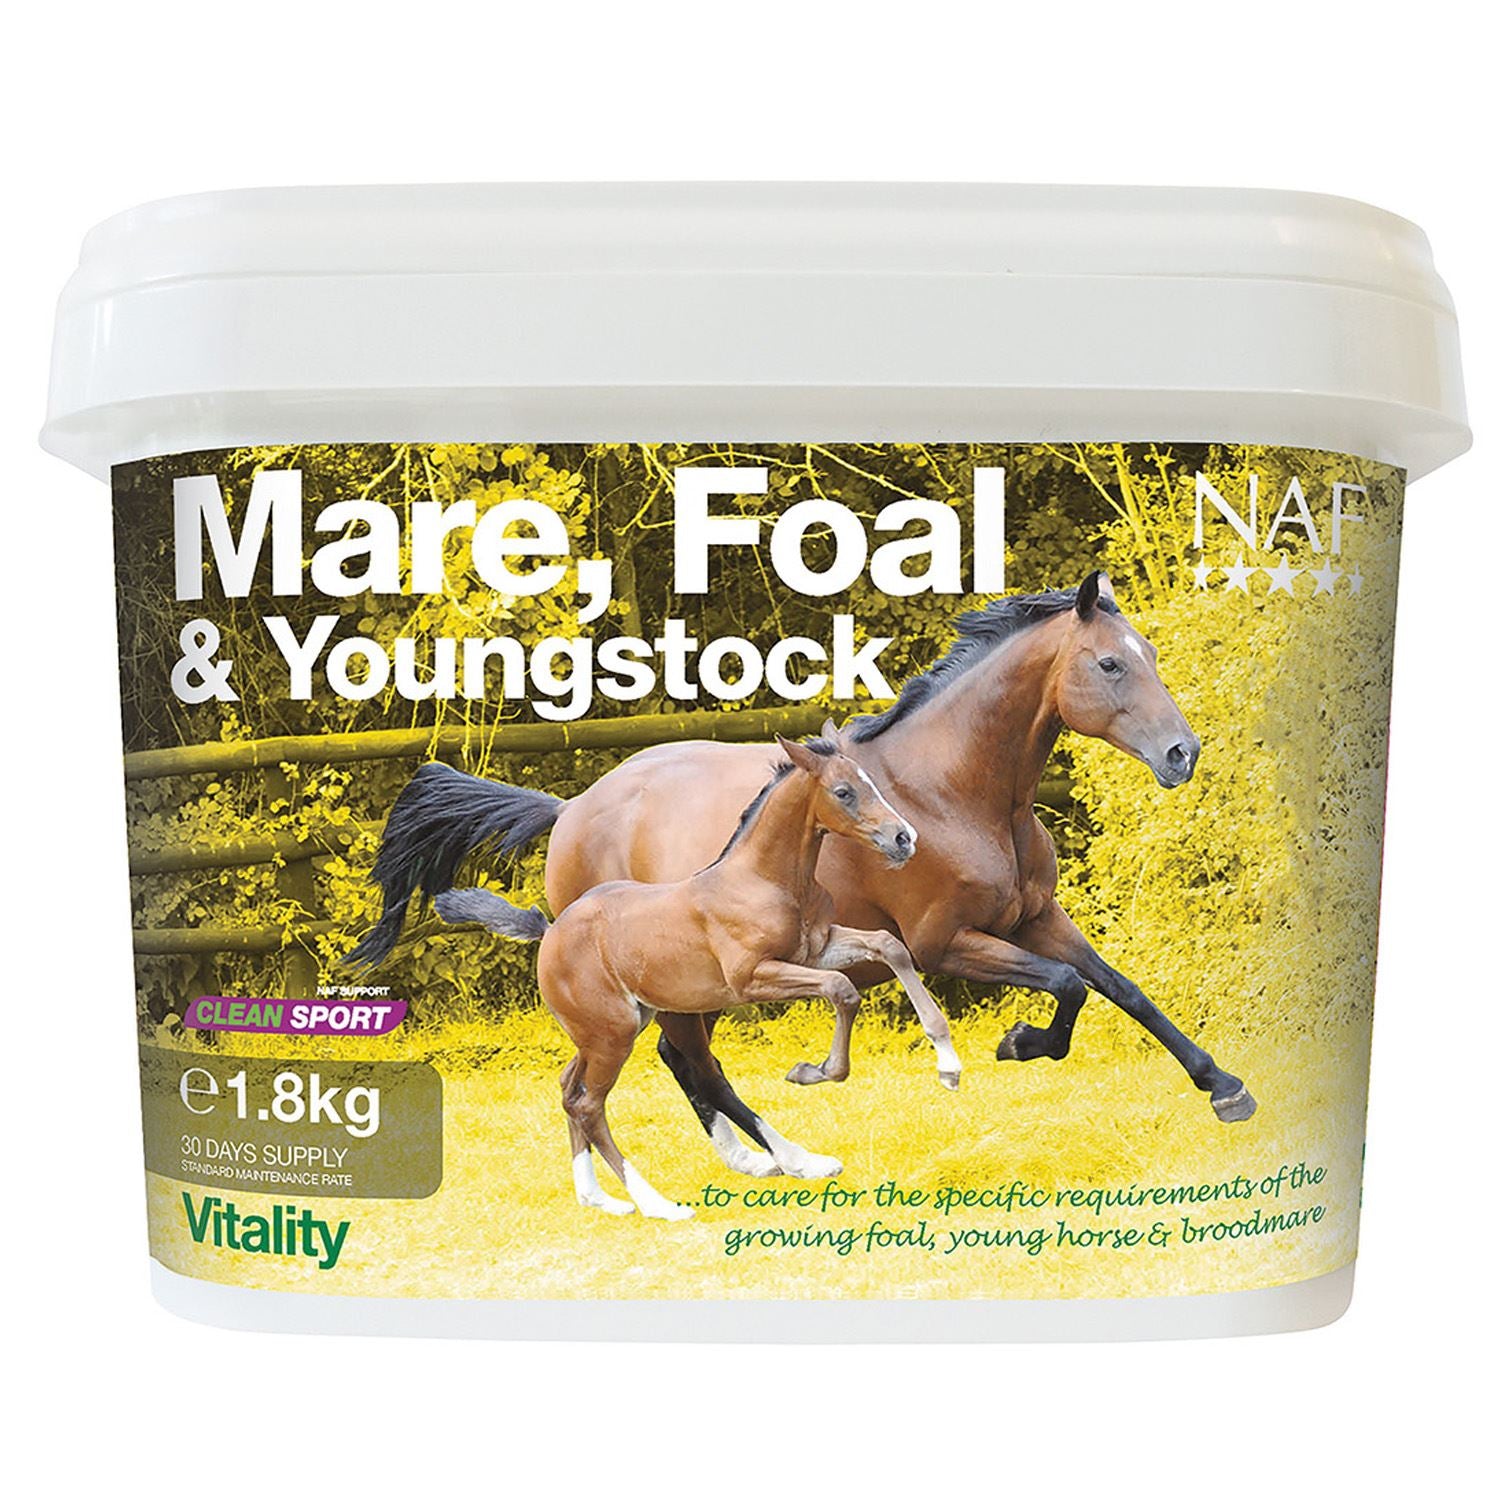 NAF Mare  Foal & Youngstock Supplement - Just Horse Riders